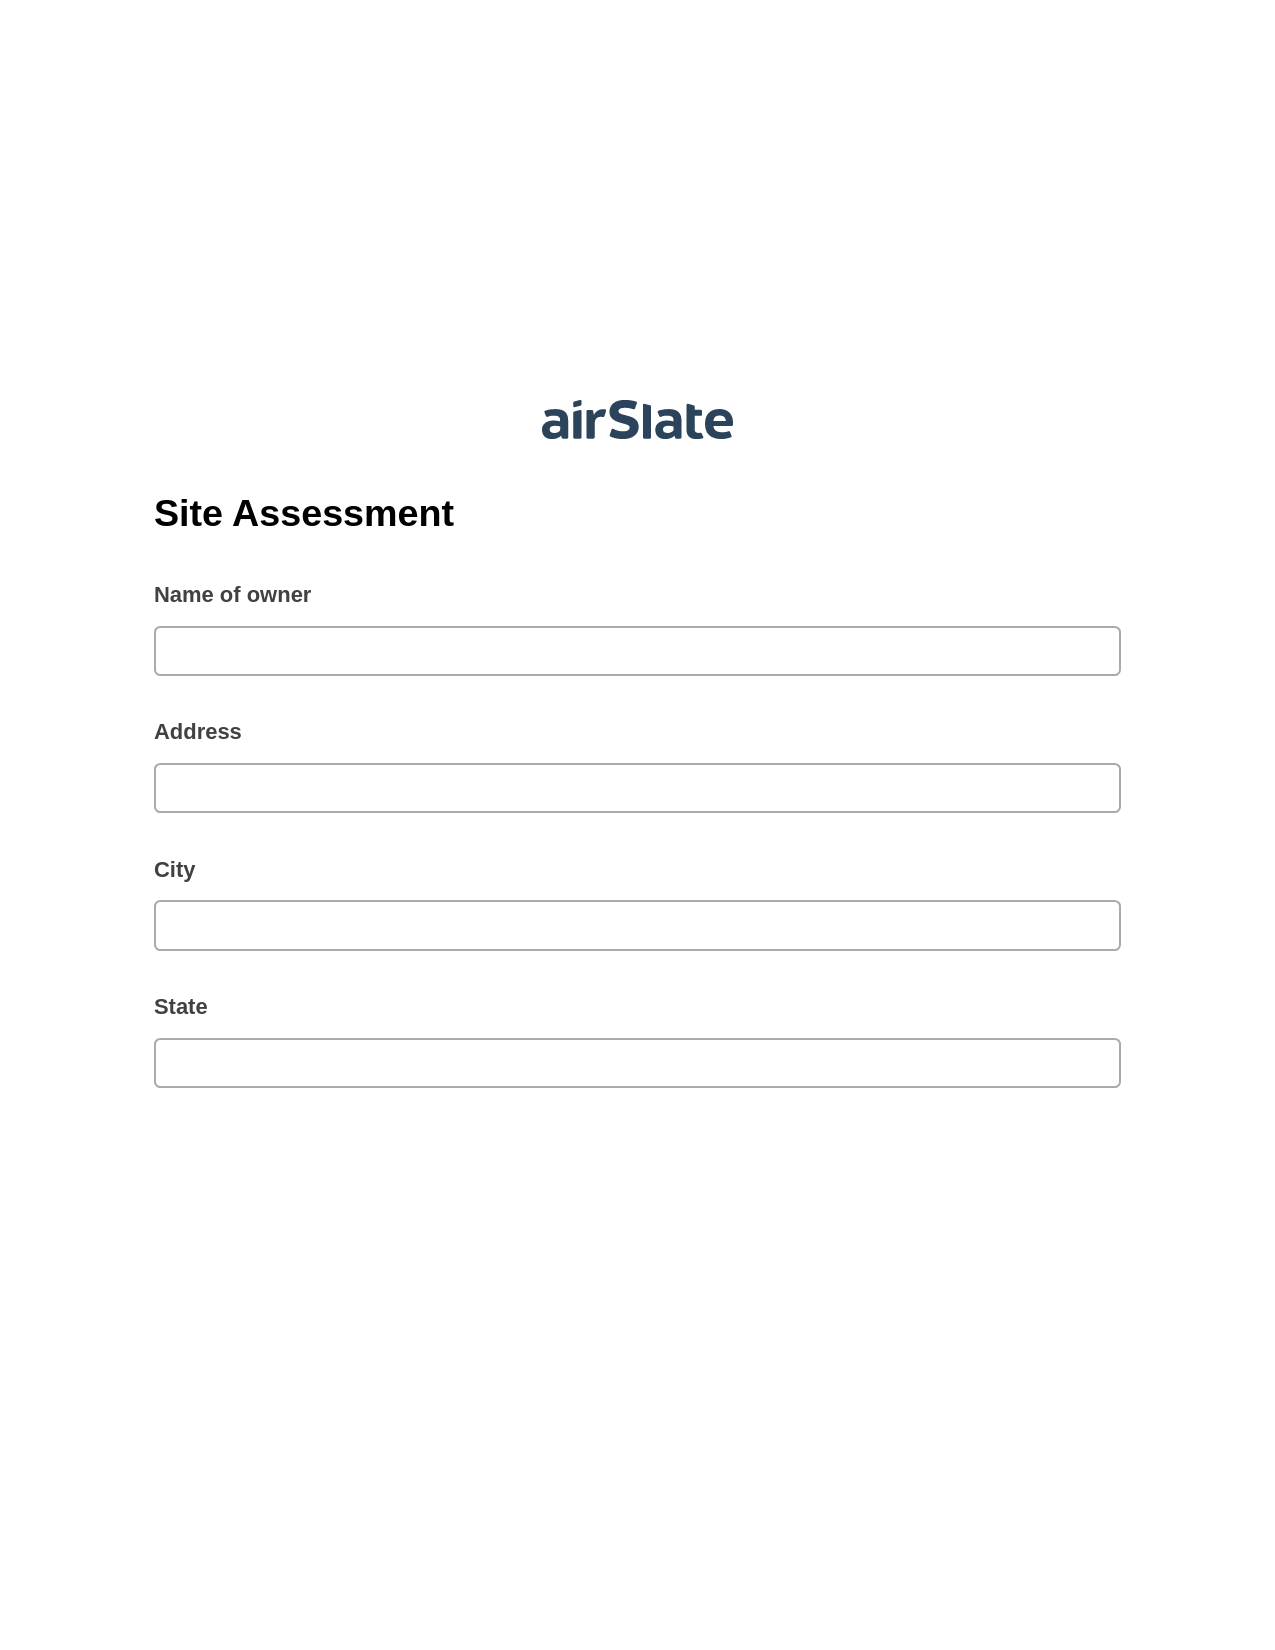 Site Assessment Pre-fill from MySQL Bot, Create slate addon, Export to NetSuite Record Bot